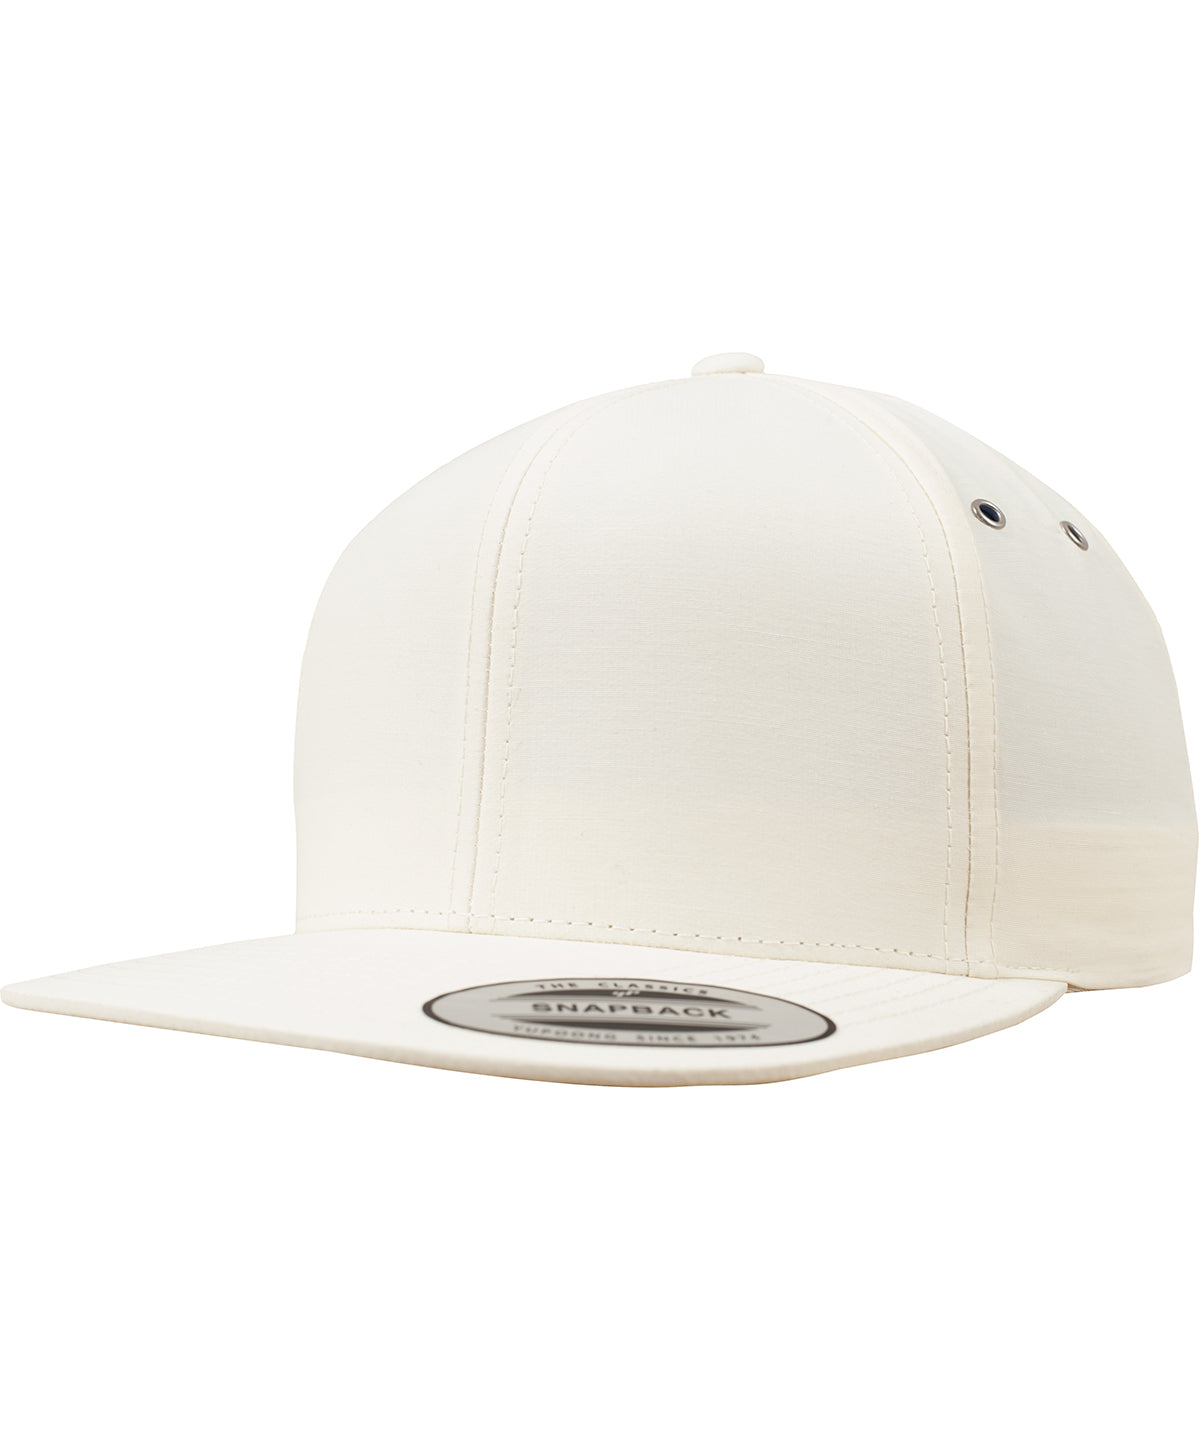 Flexfit by Yupoong Water-repellent snapback